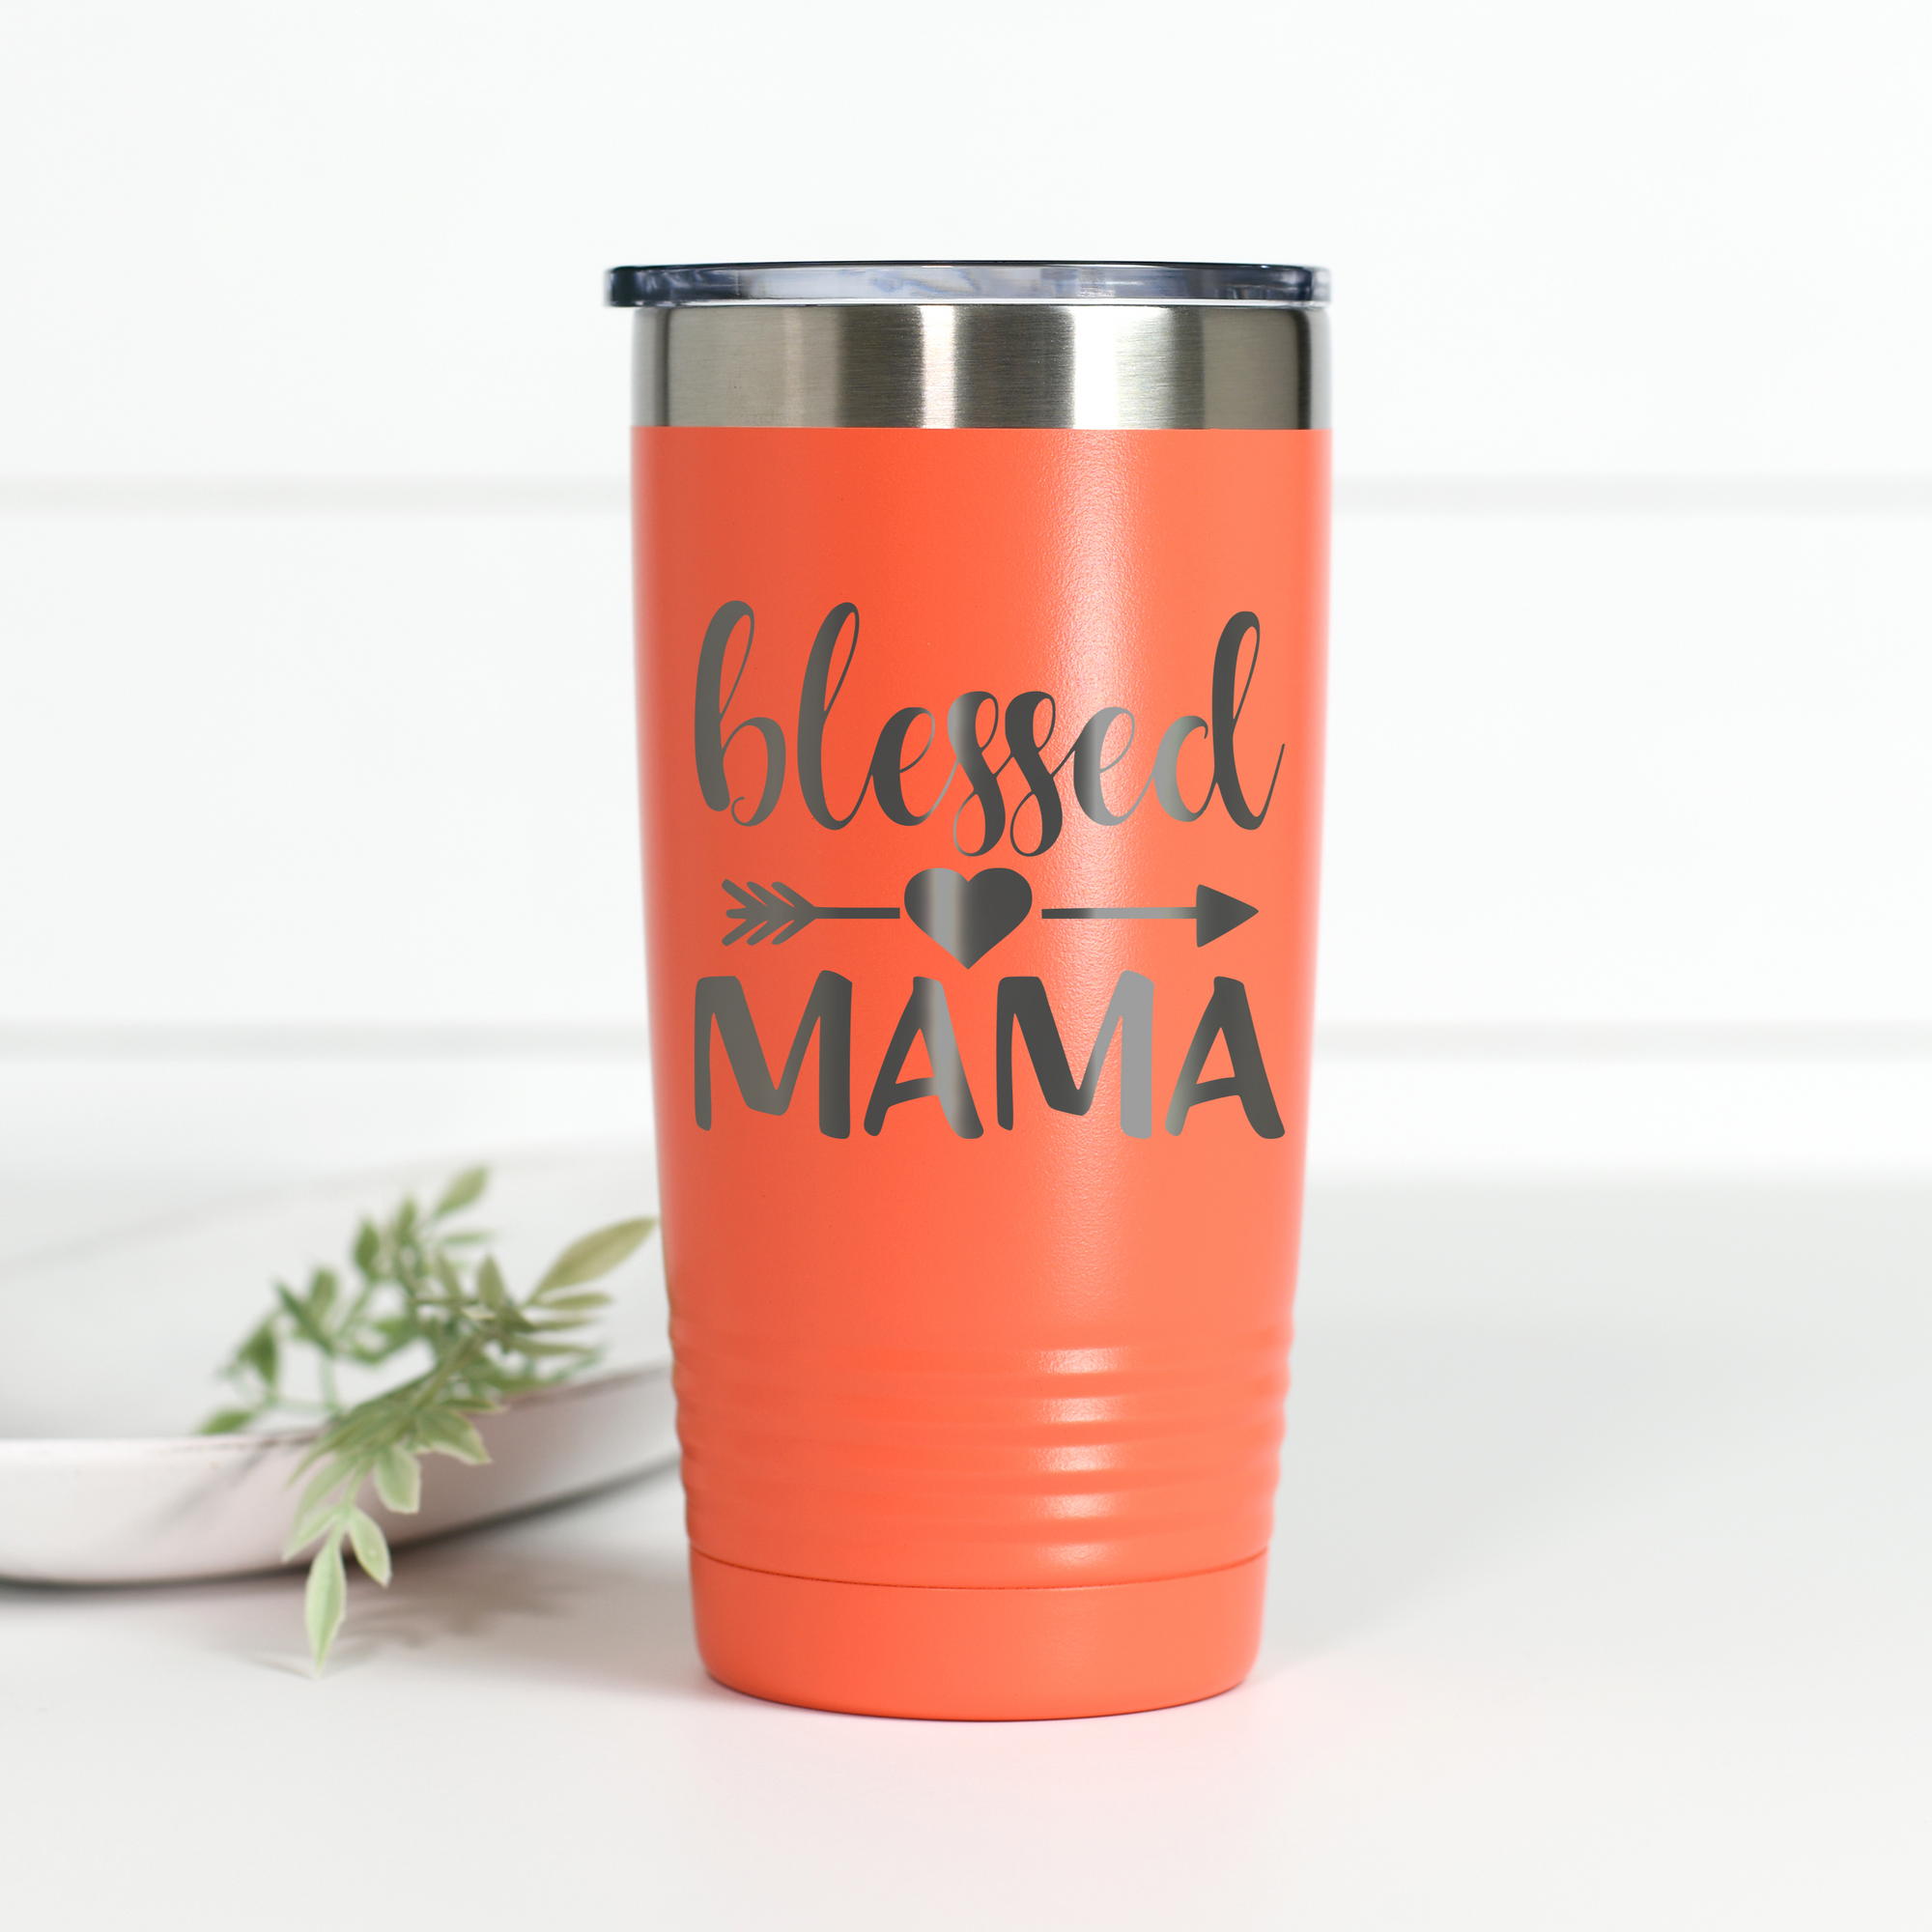 https://cdn.shopify.com/s/files/1/2109/3813/products/blessedmama20oz_2000x.png?v=1598942830